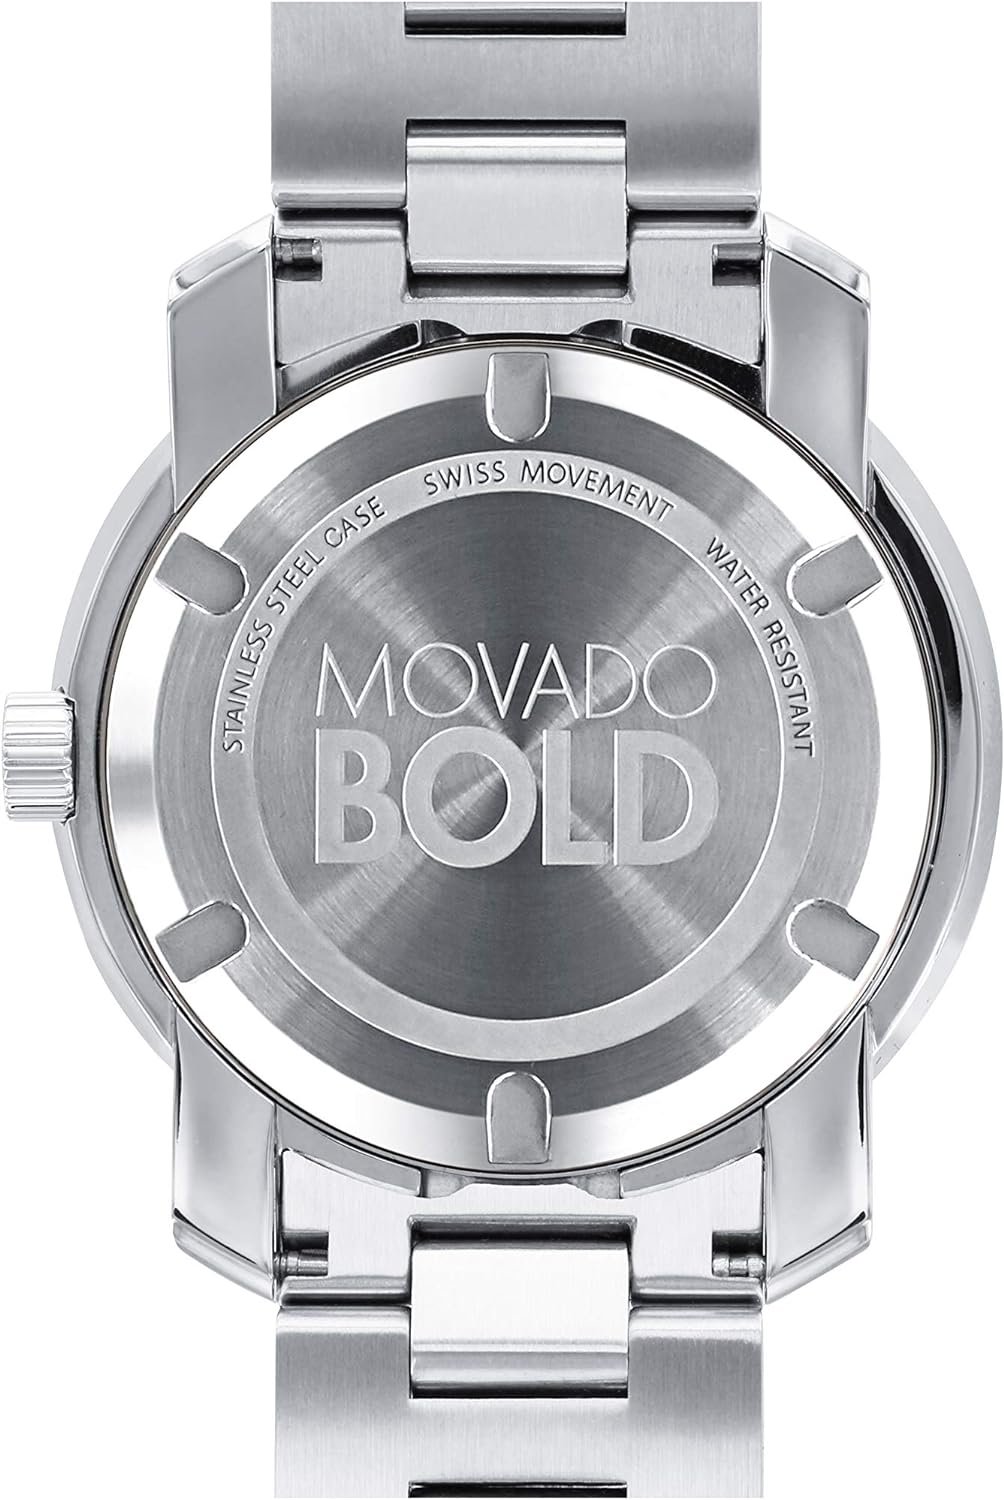 Movado Mens BOLD Metals Two-Tone Watch with a Printed Index Dial, Silver/Grey/Gold (3600431)